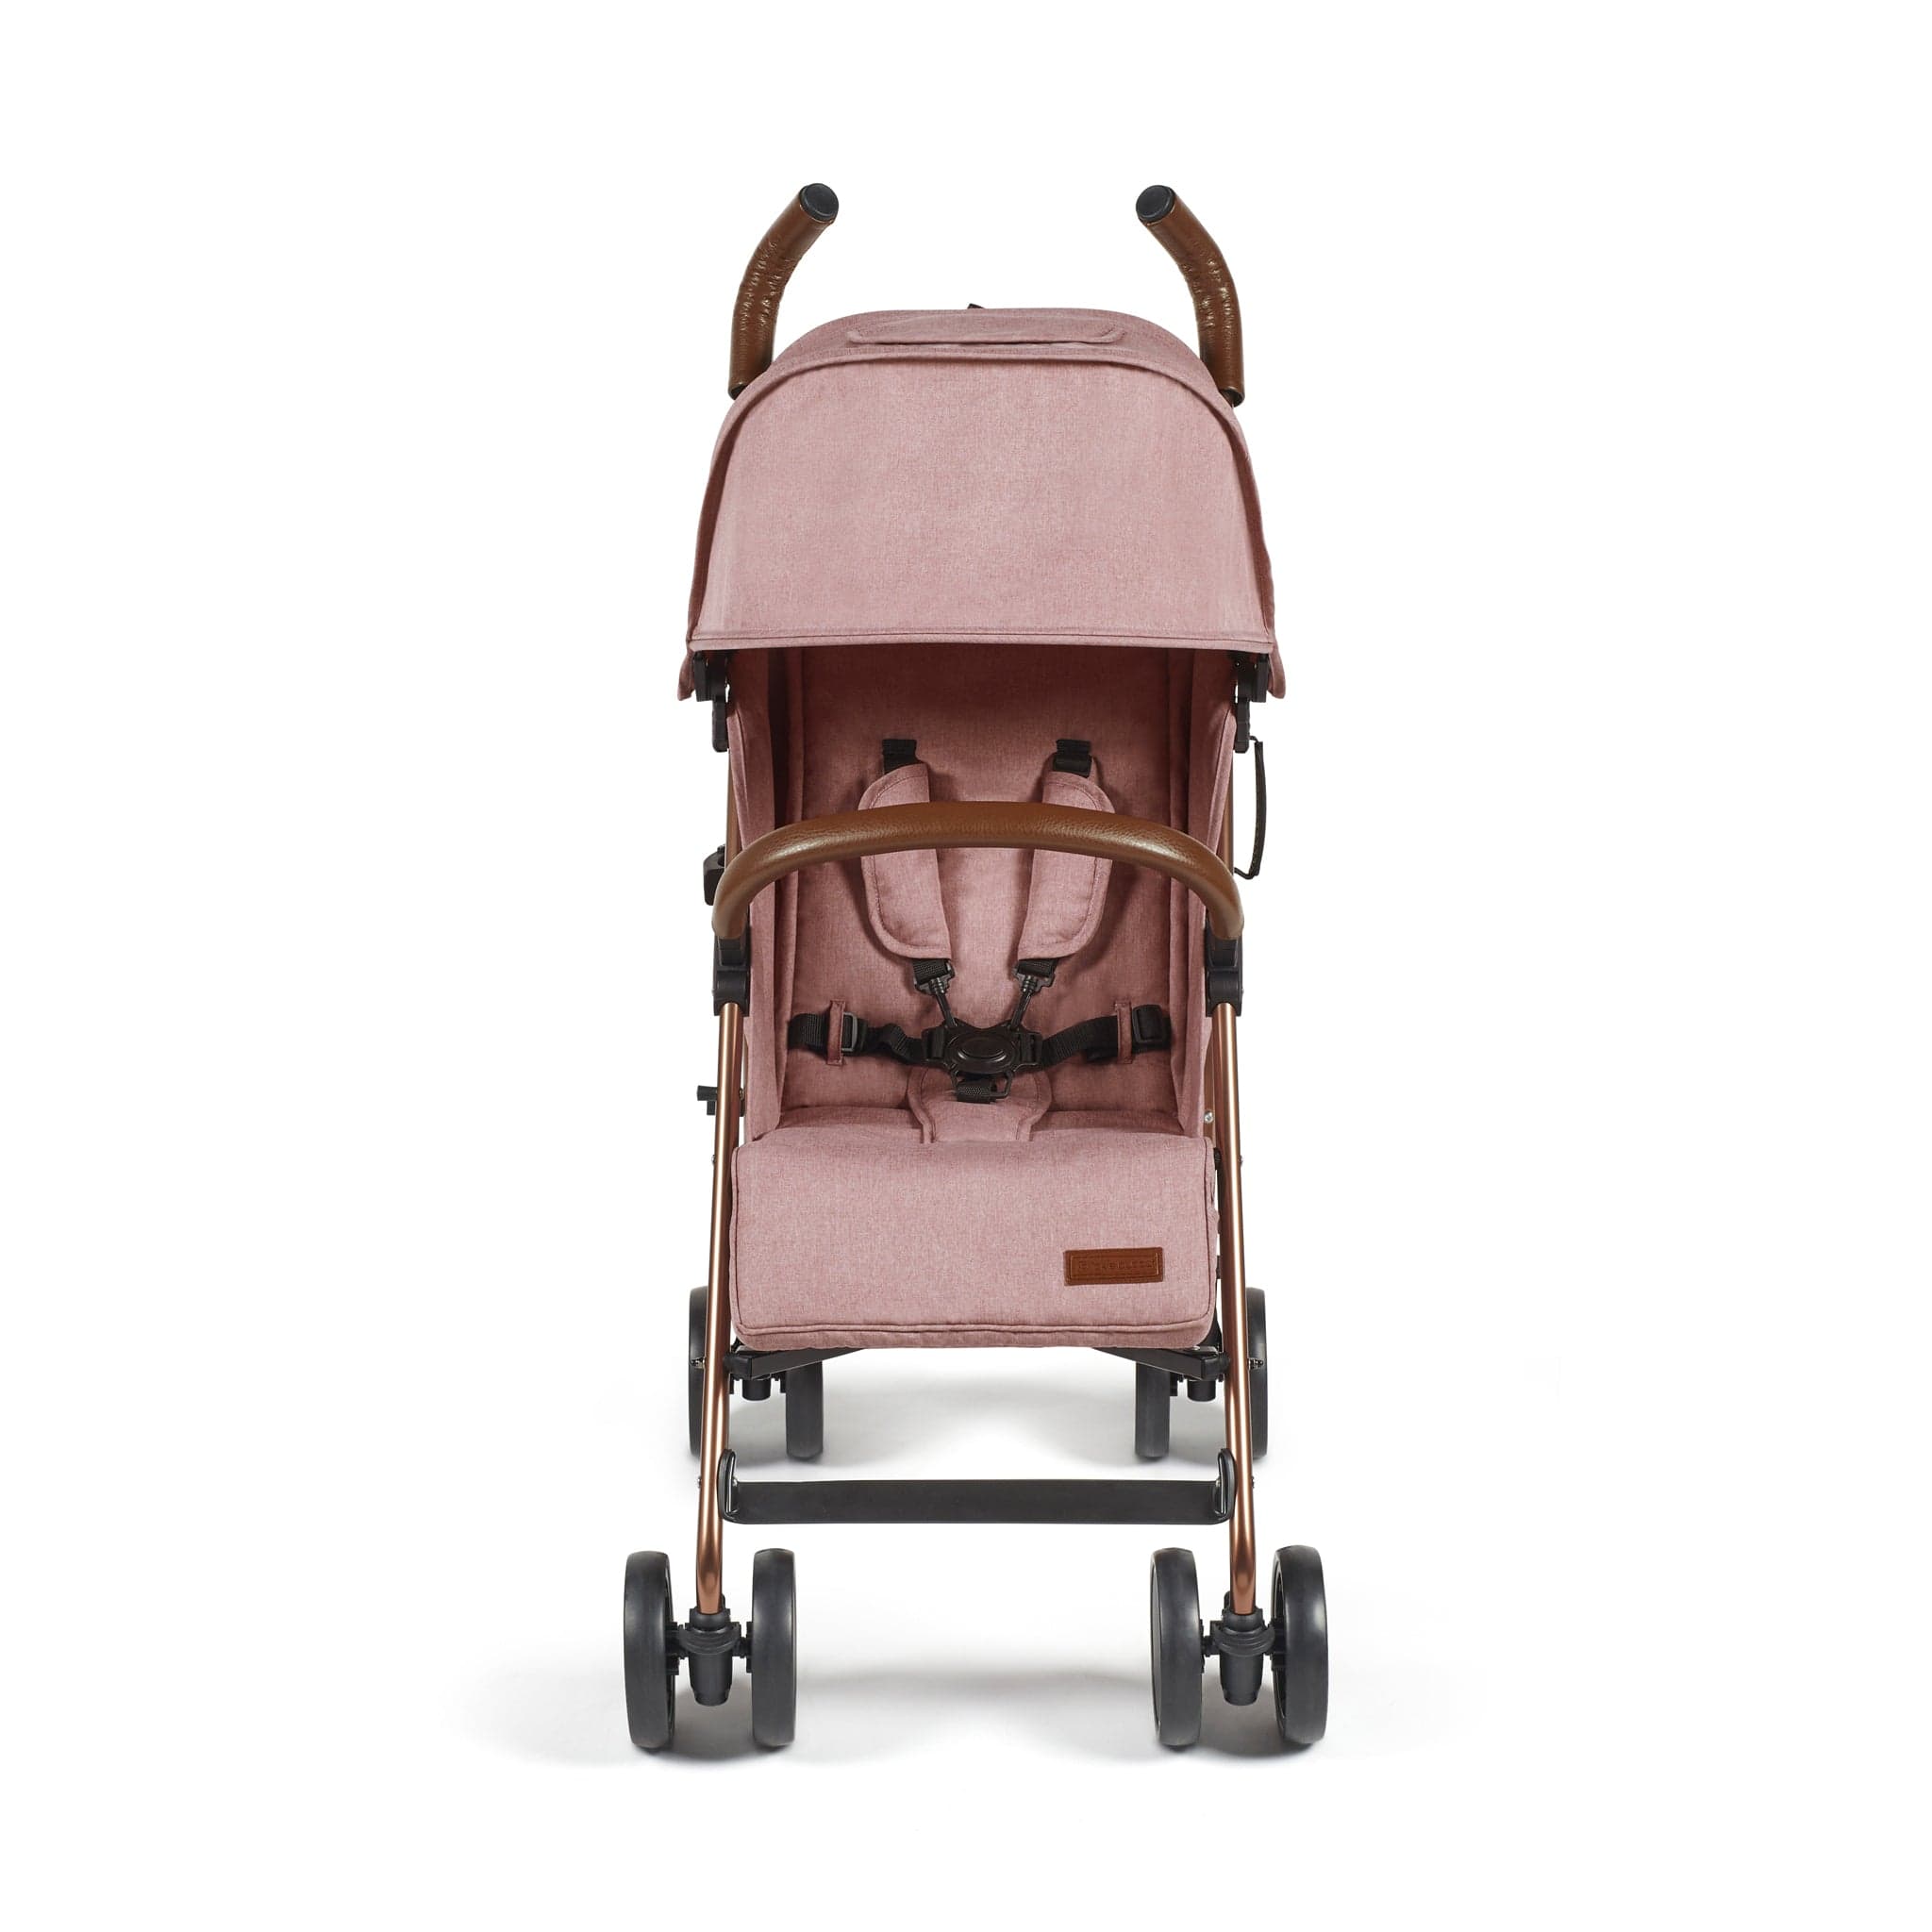 Ickle Bubba Discovery Max Stroller Dusty Pink/Rose Gold Pushchairs & Buggies 15-002-200-121 5056515020113